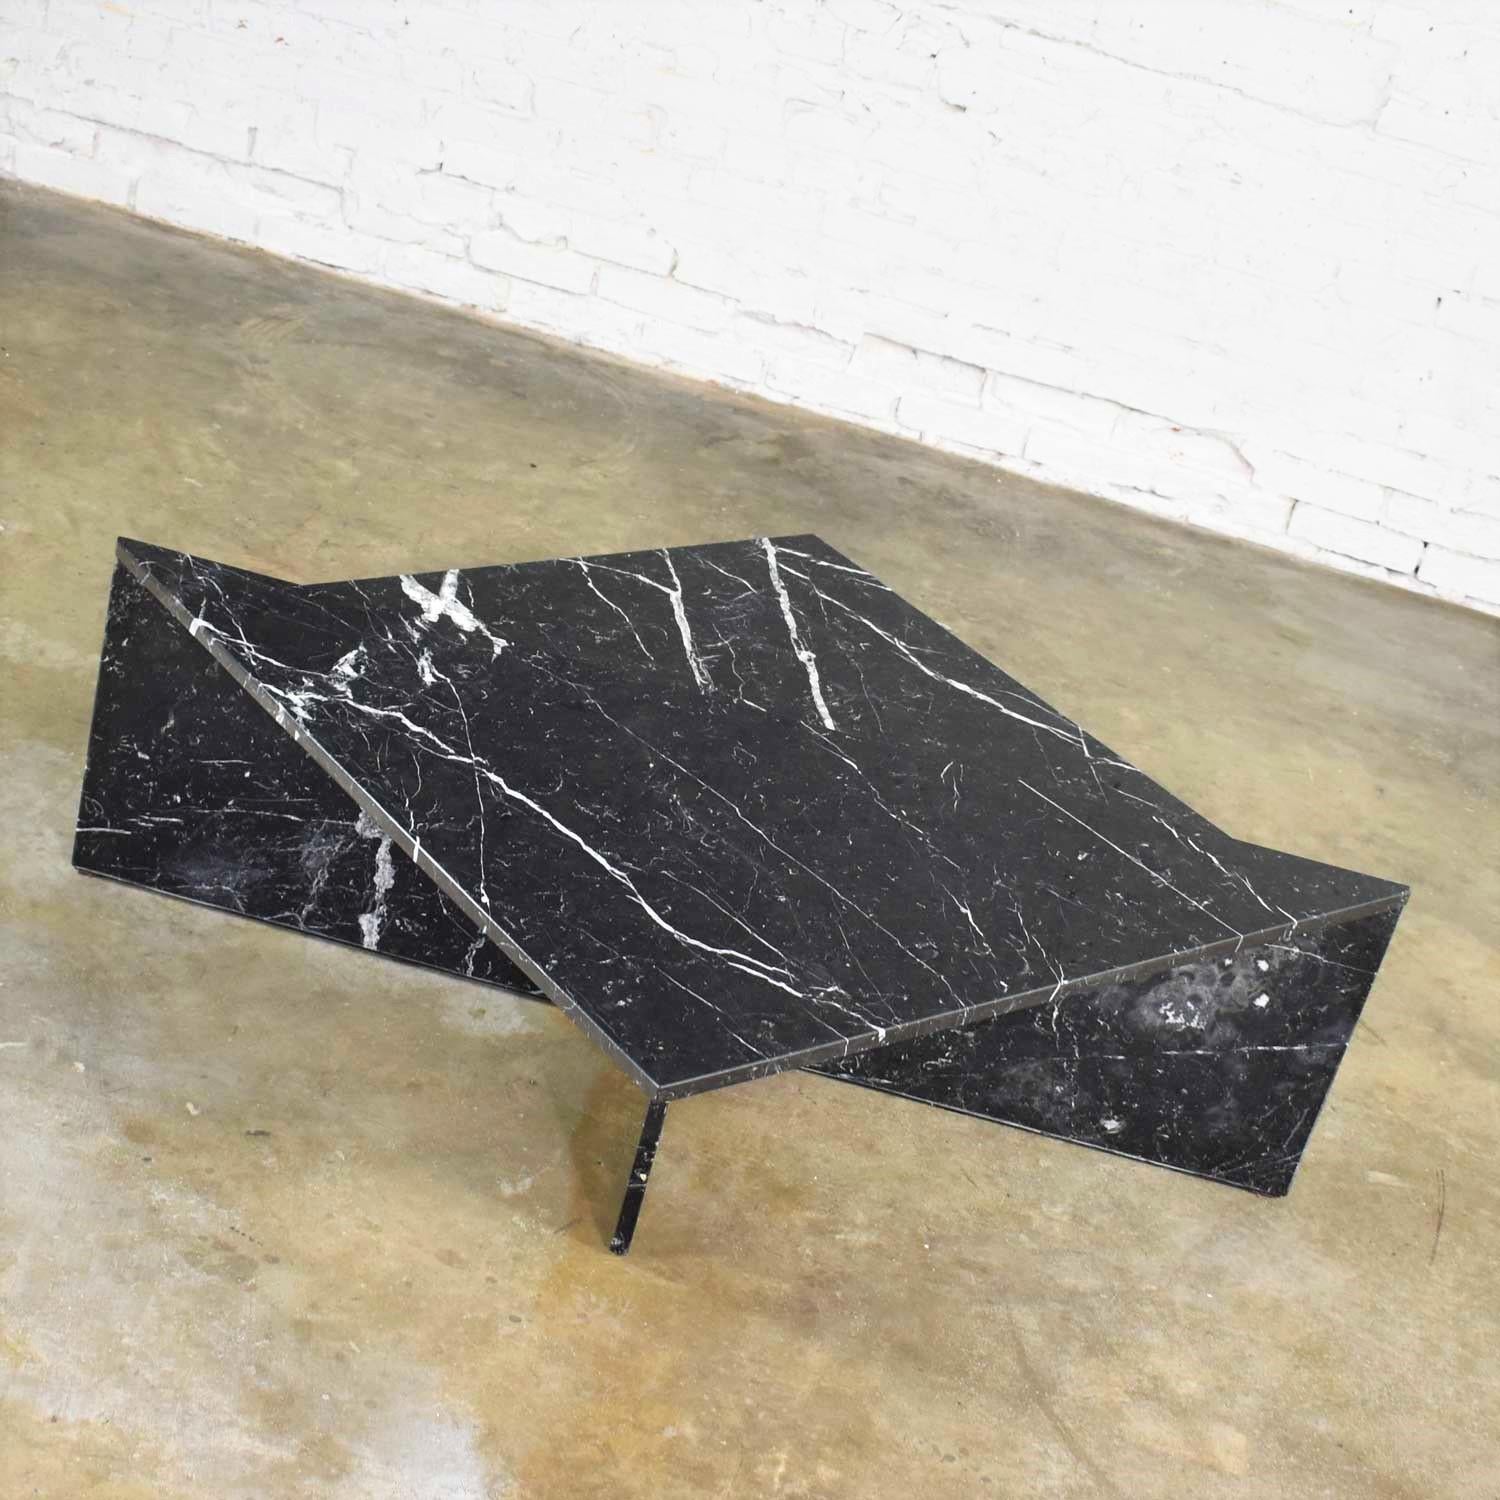 20th Century Black Marble Triangle Bi-Level Coffee Table or Pair End Tables Style Up & Up